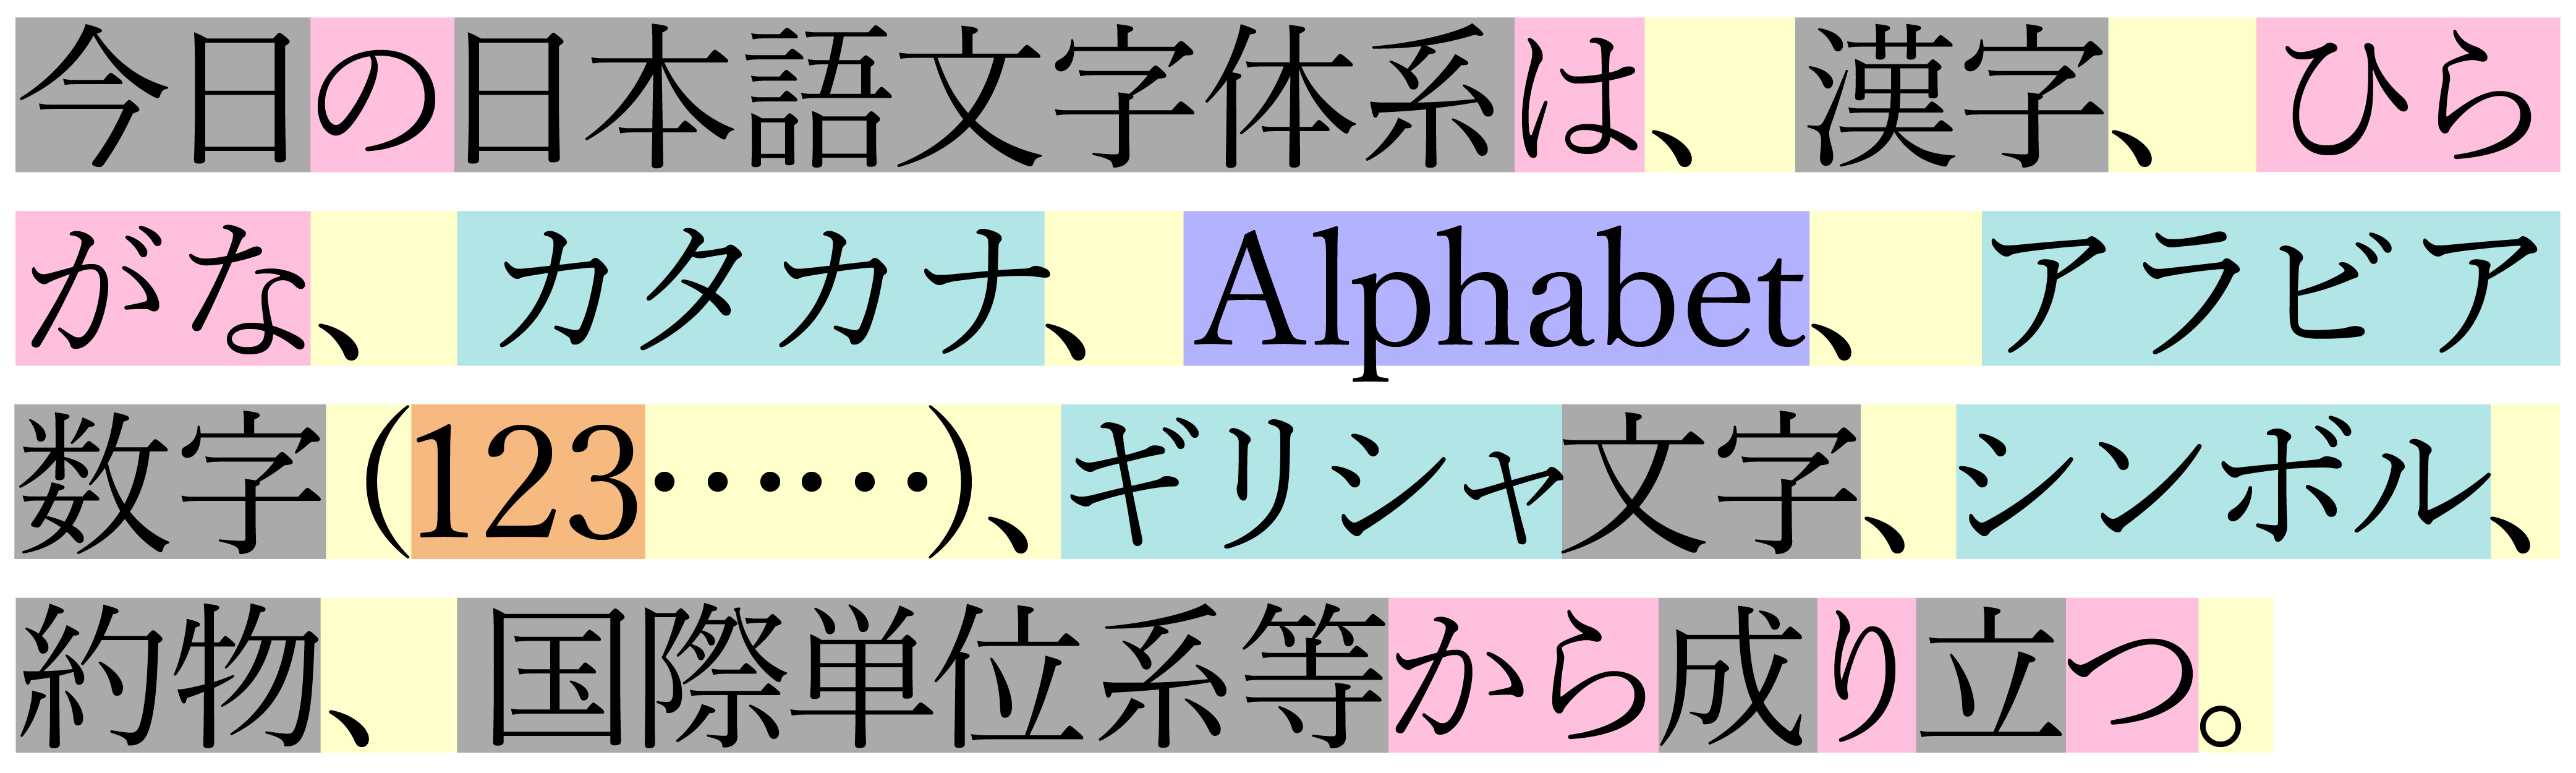 Kanji (grey) + hiragana (red) + katakana (blue) + Latin alphabet (purple) + Arabic numerals (orange) + punctuation (yellow) 
Vertical and horizontal writing are permitted in Japan. This is a horizontal sentence, for example.